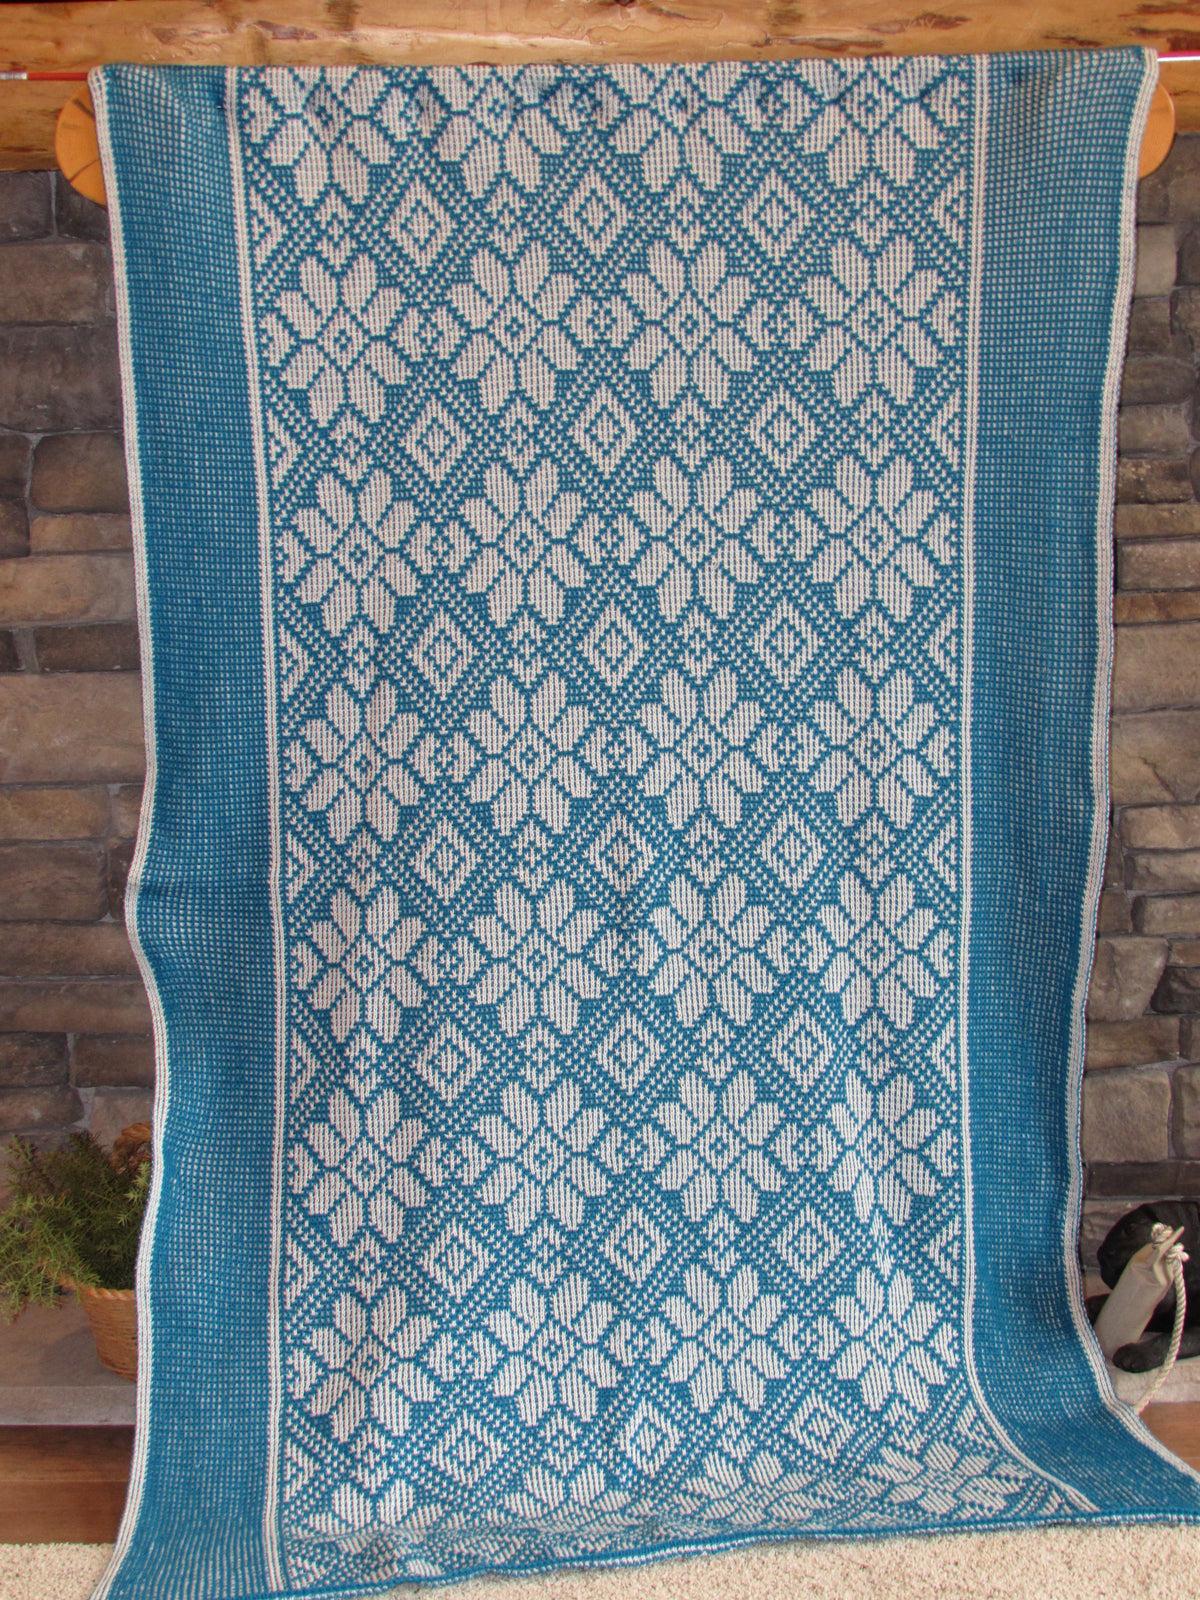 Flower Diamond Knit Afghan or Lap Blanket, Large Size-50" x 80", Free Shipping